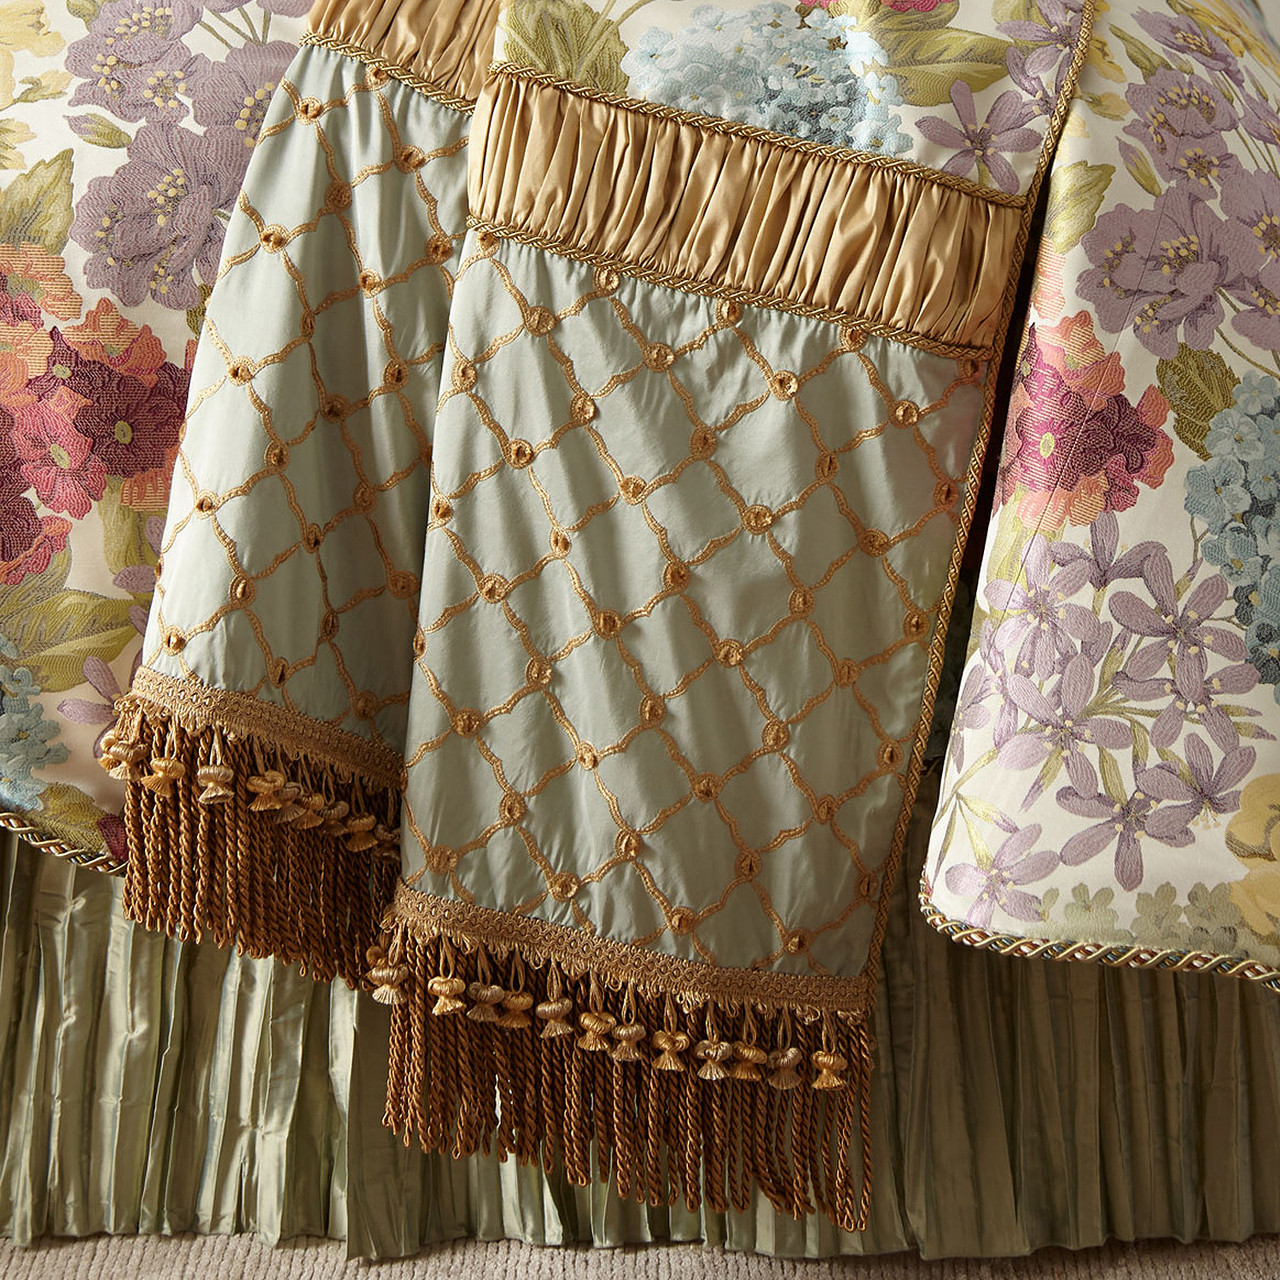 Conso Tassel Fringe Trim - Yellow (Sold by the Yard)